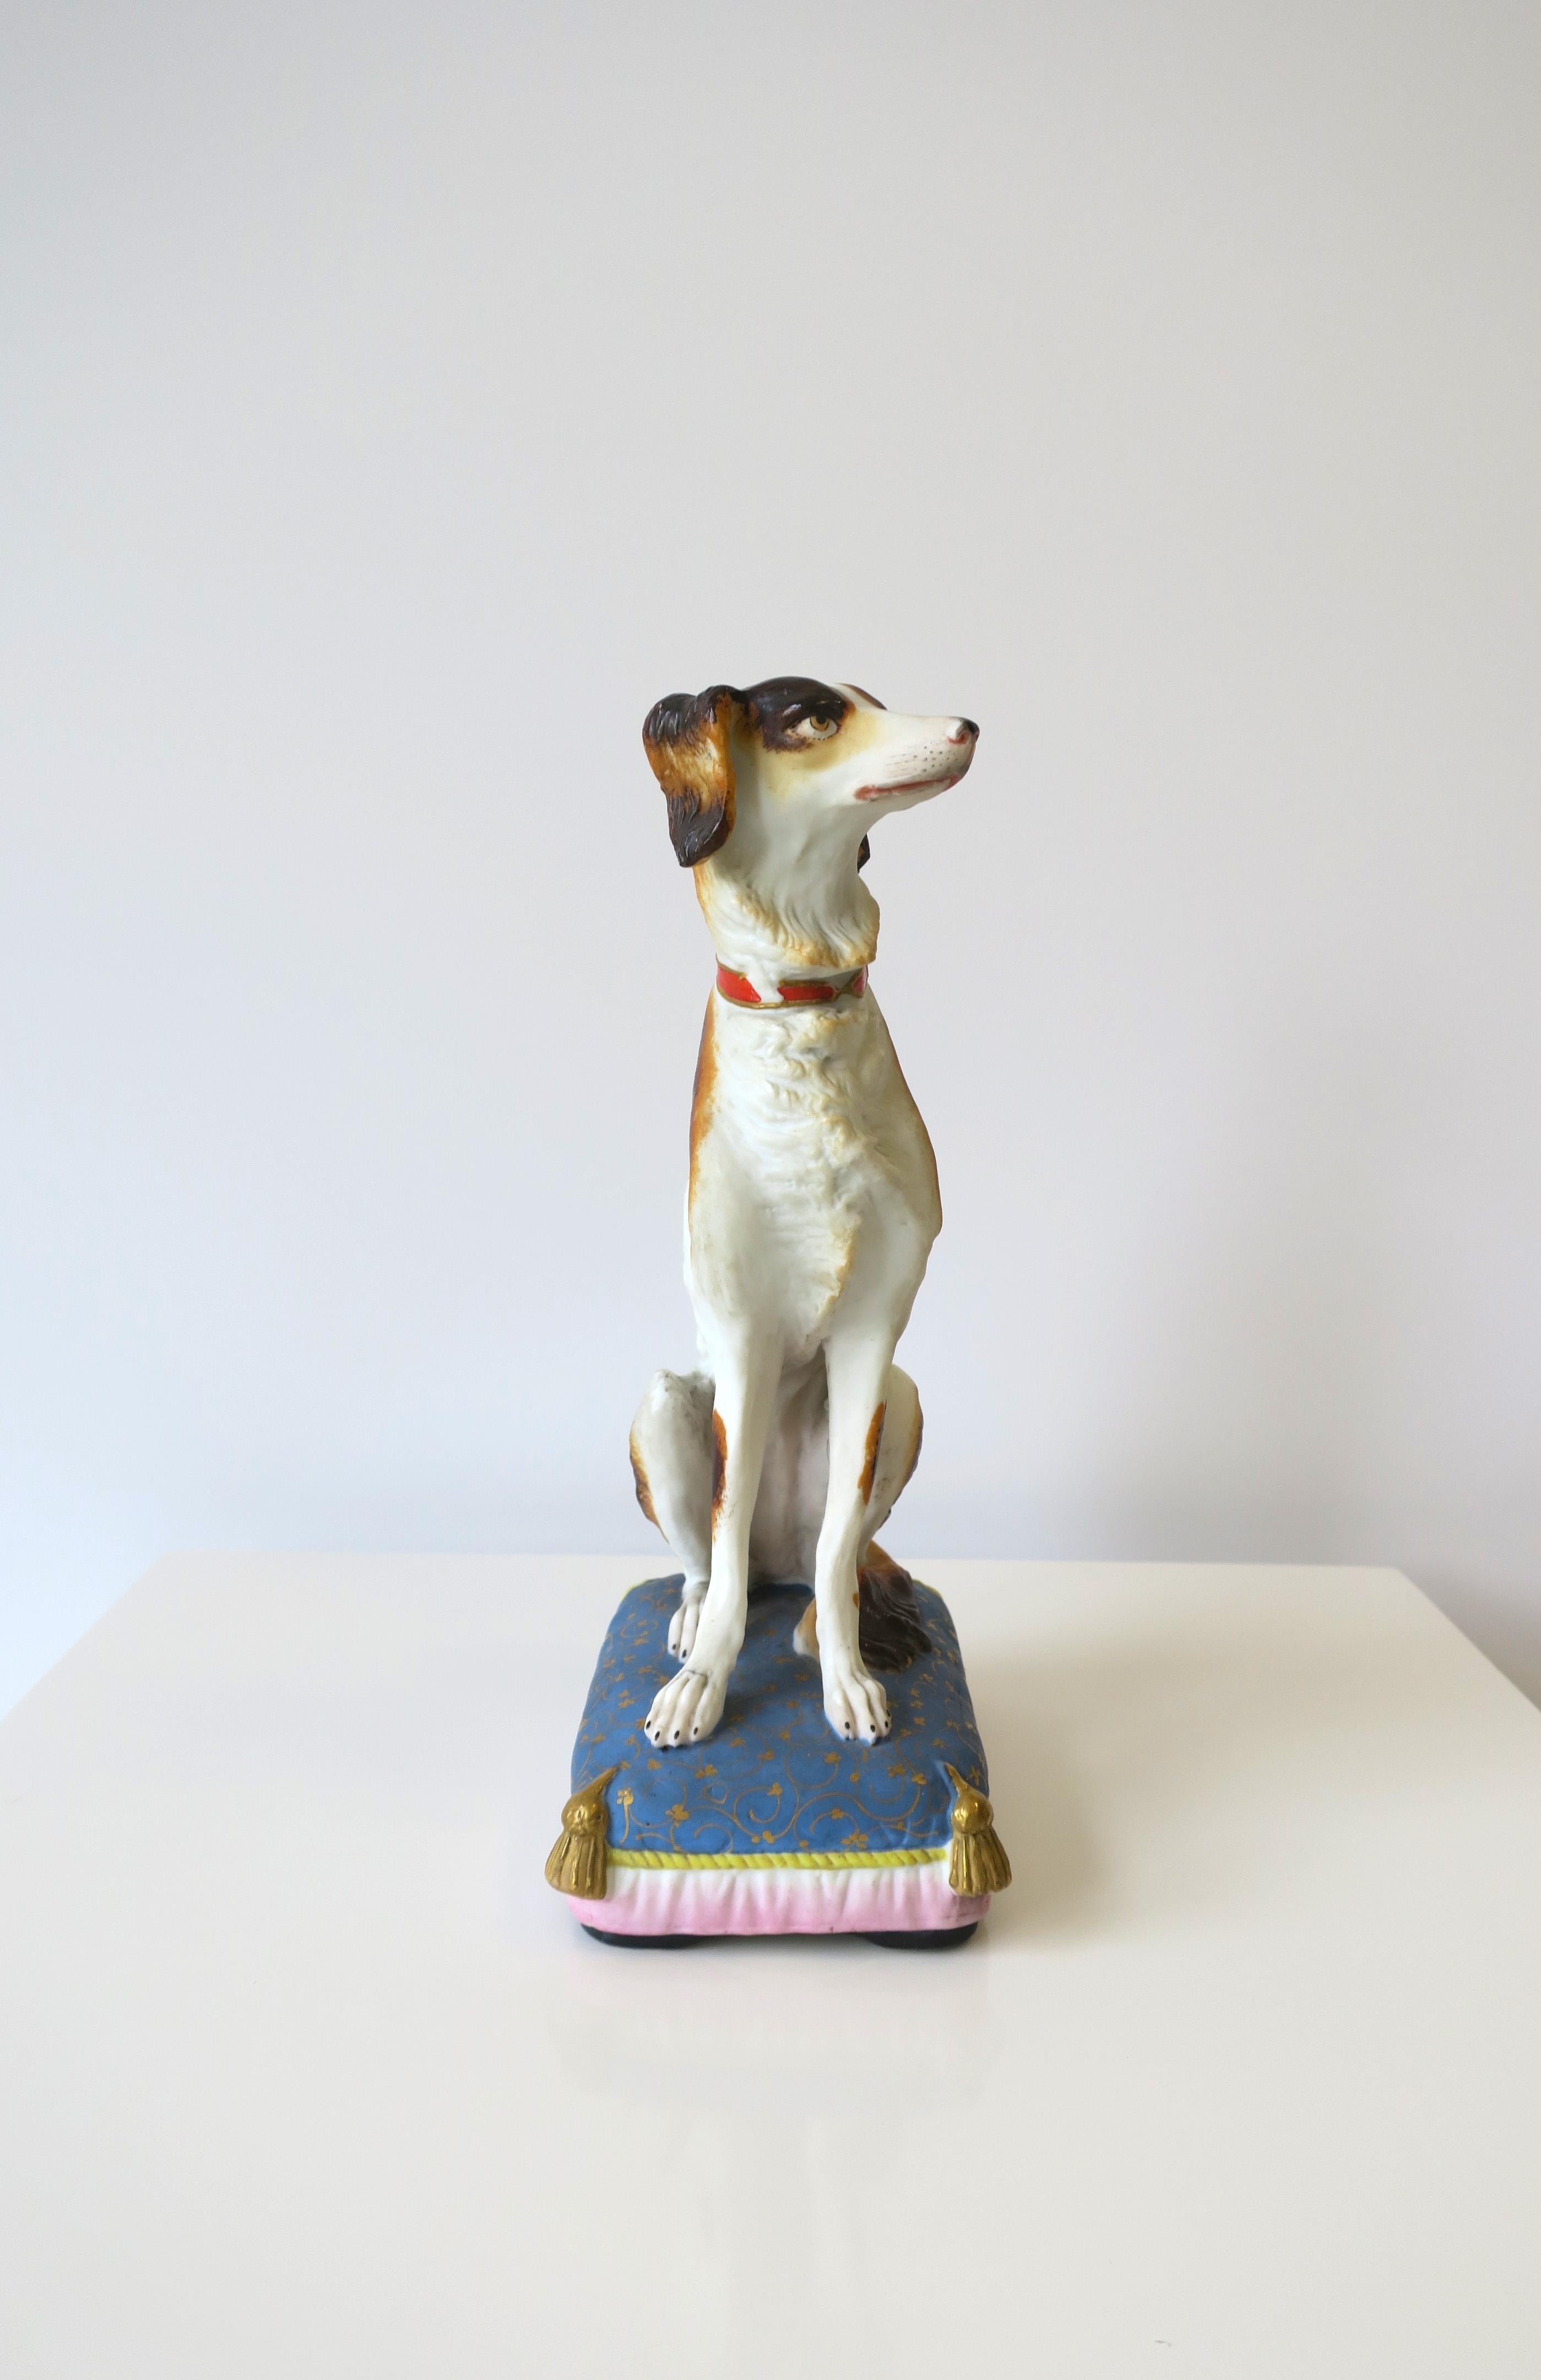 A beautiful porcelain regal dog sitting on fancy pillow, circa mid-20th century. A great decorative object. Piece is matte unglazed porcelain ceramic of a brown and white dog, a red and gold collar, sitting on fluffy blue pillow with yellow and gold